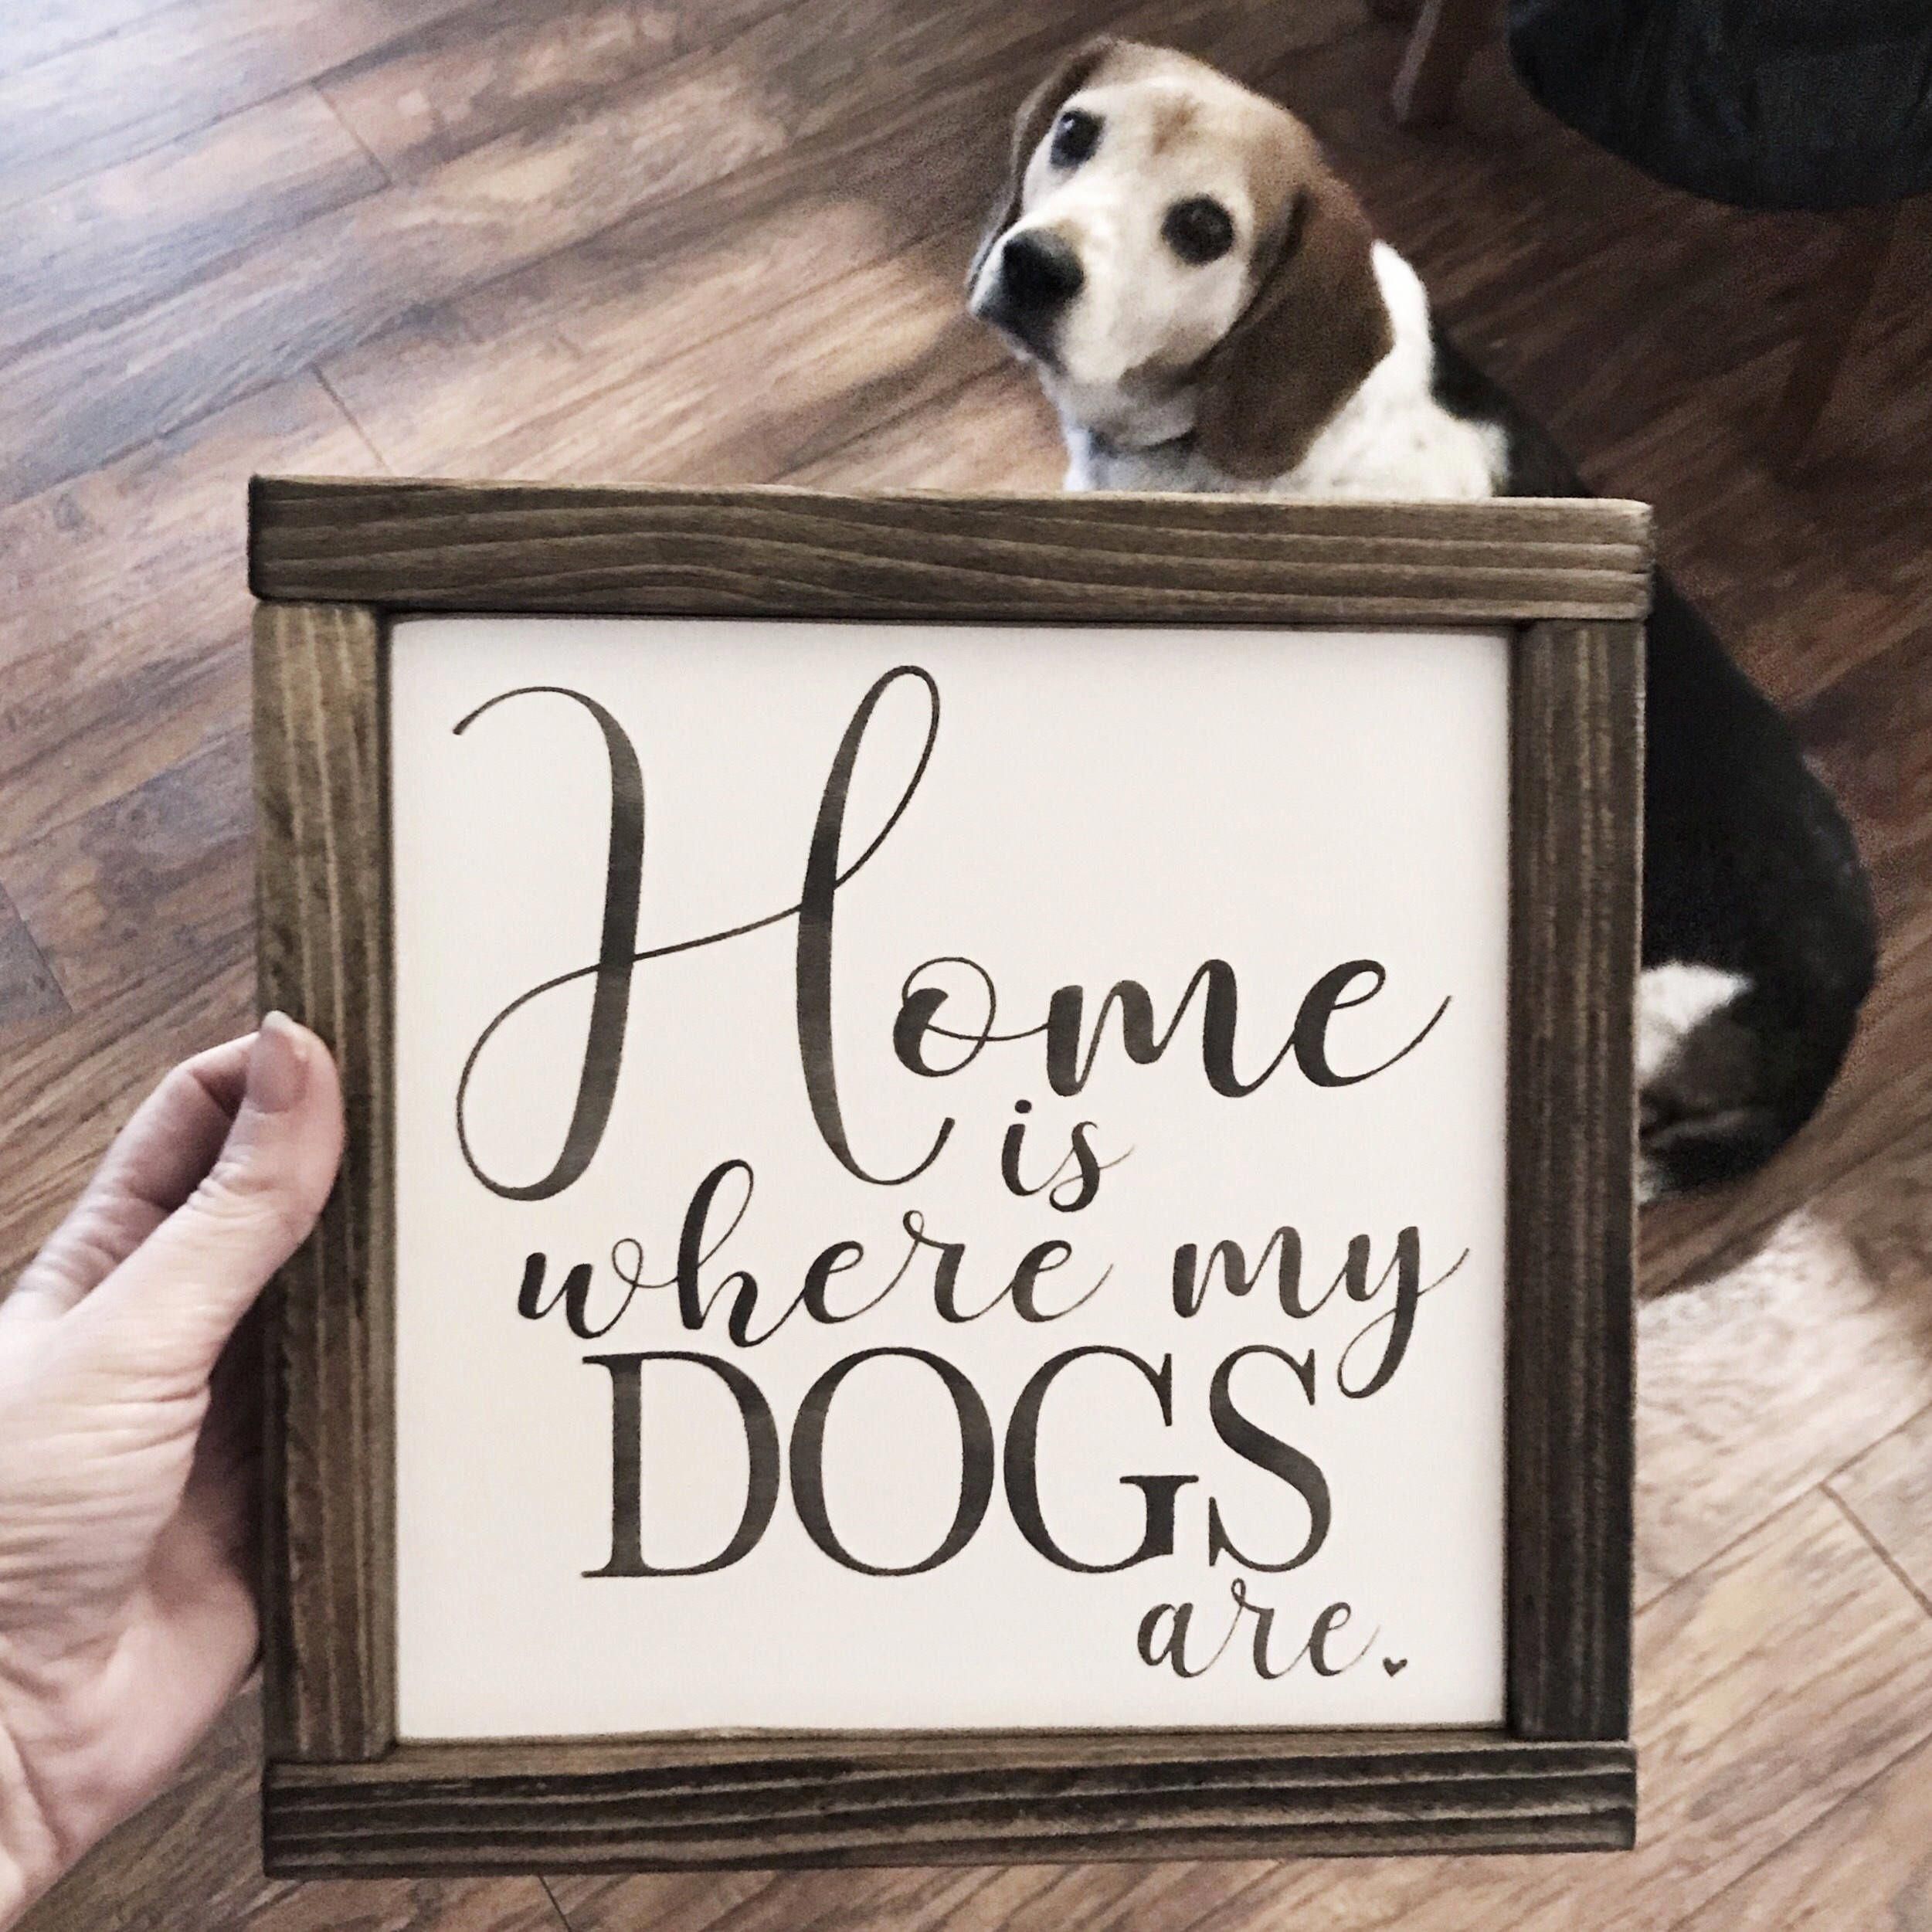 Home Is Where My Dogs Are Wood Sign, Gift, Farmhouse Decor, Wall Decor, Home Decor, Dog Sign, Funny Sign - Home Is Where My Dogs Are Wood Sign, Gift, Farmhouse Decor, Wall Decor, Home Decor, Dog Sign, Funny Sign -   19 diy Home Decor unique ideas